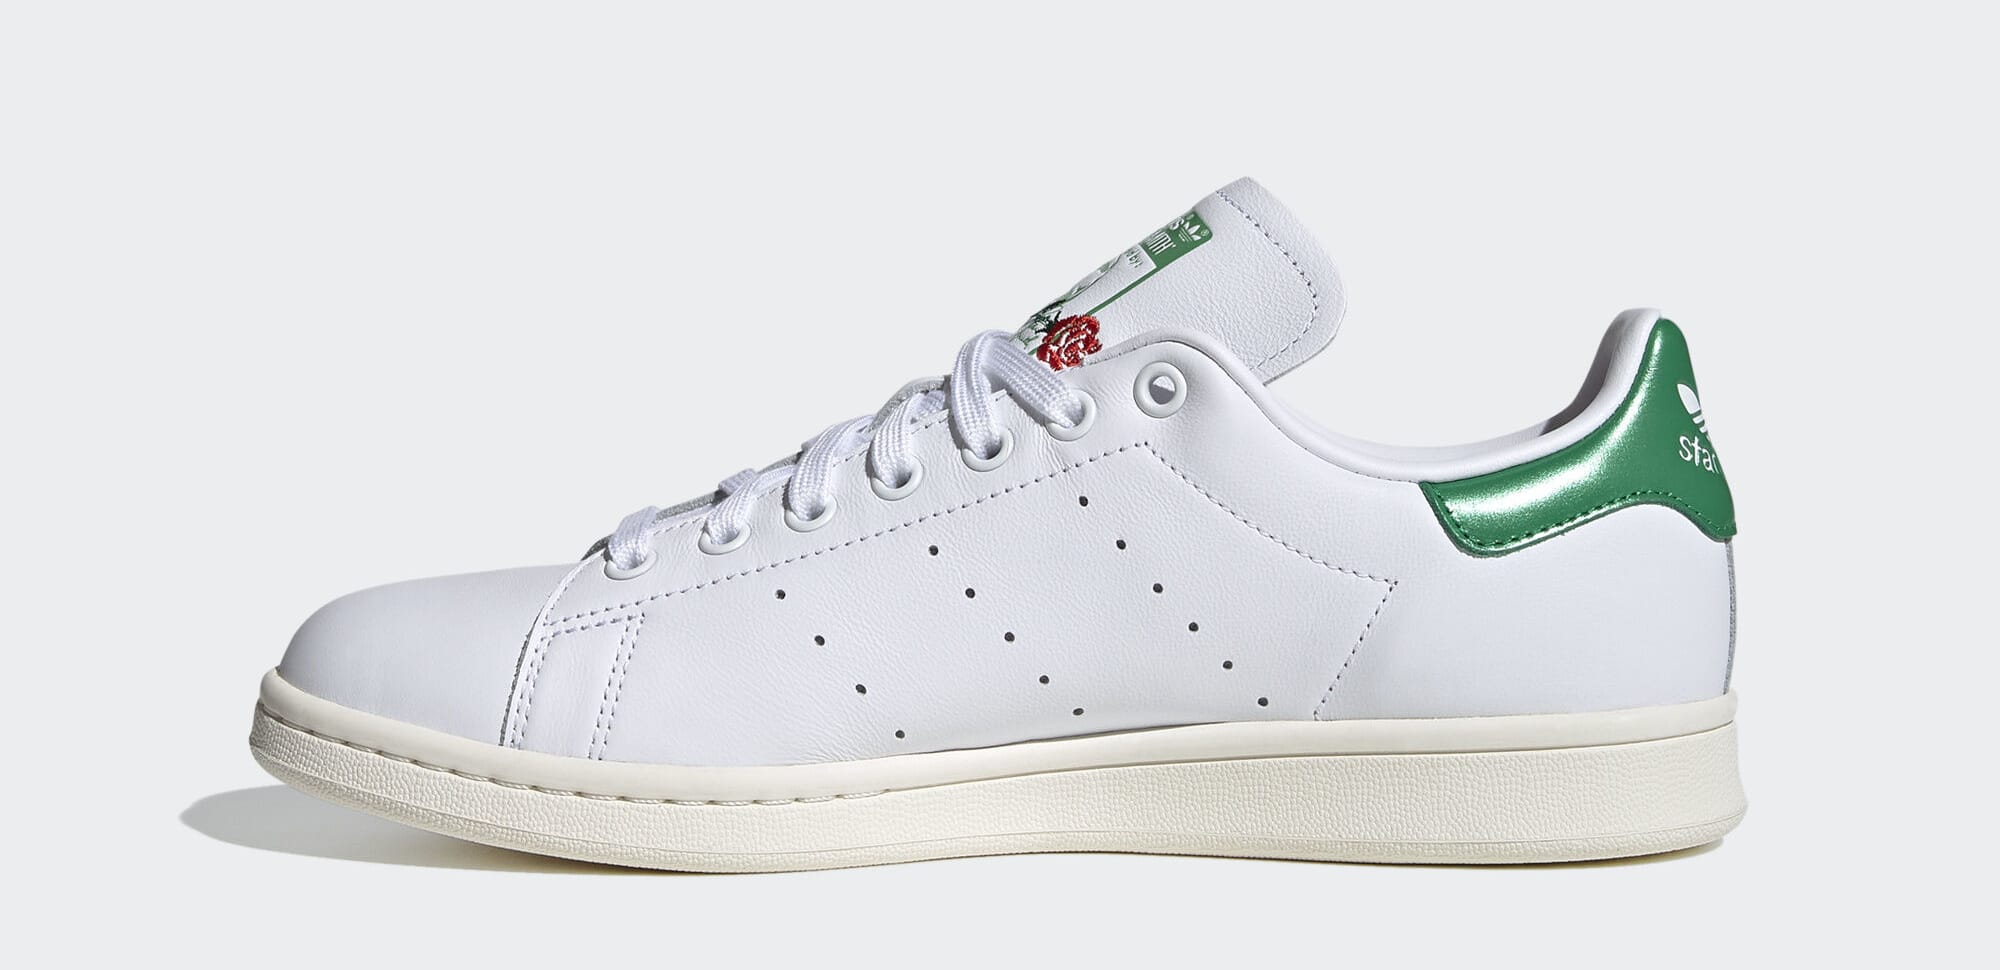 when did adidas stan smith come out